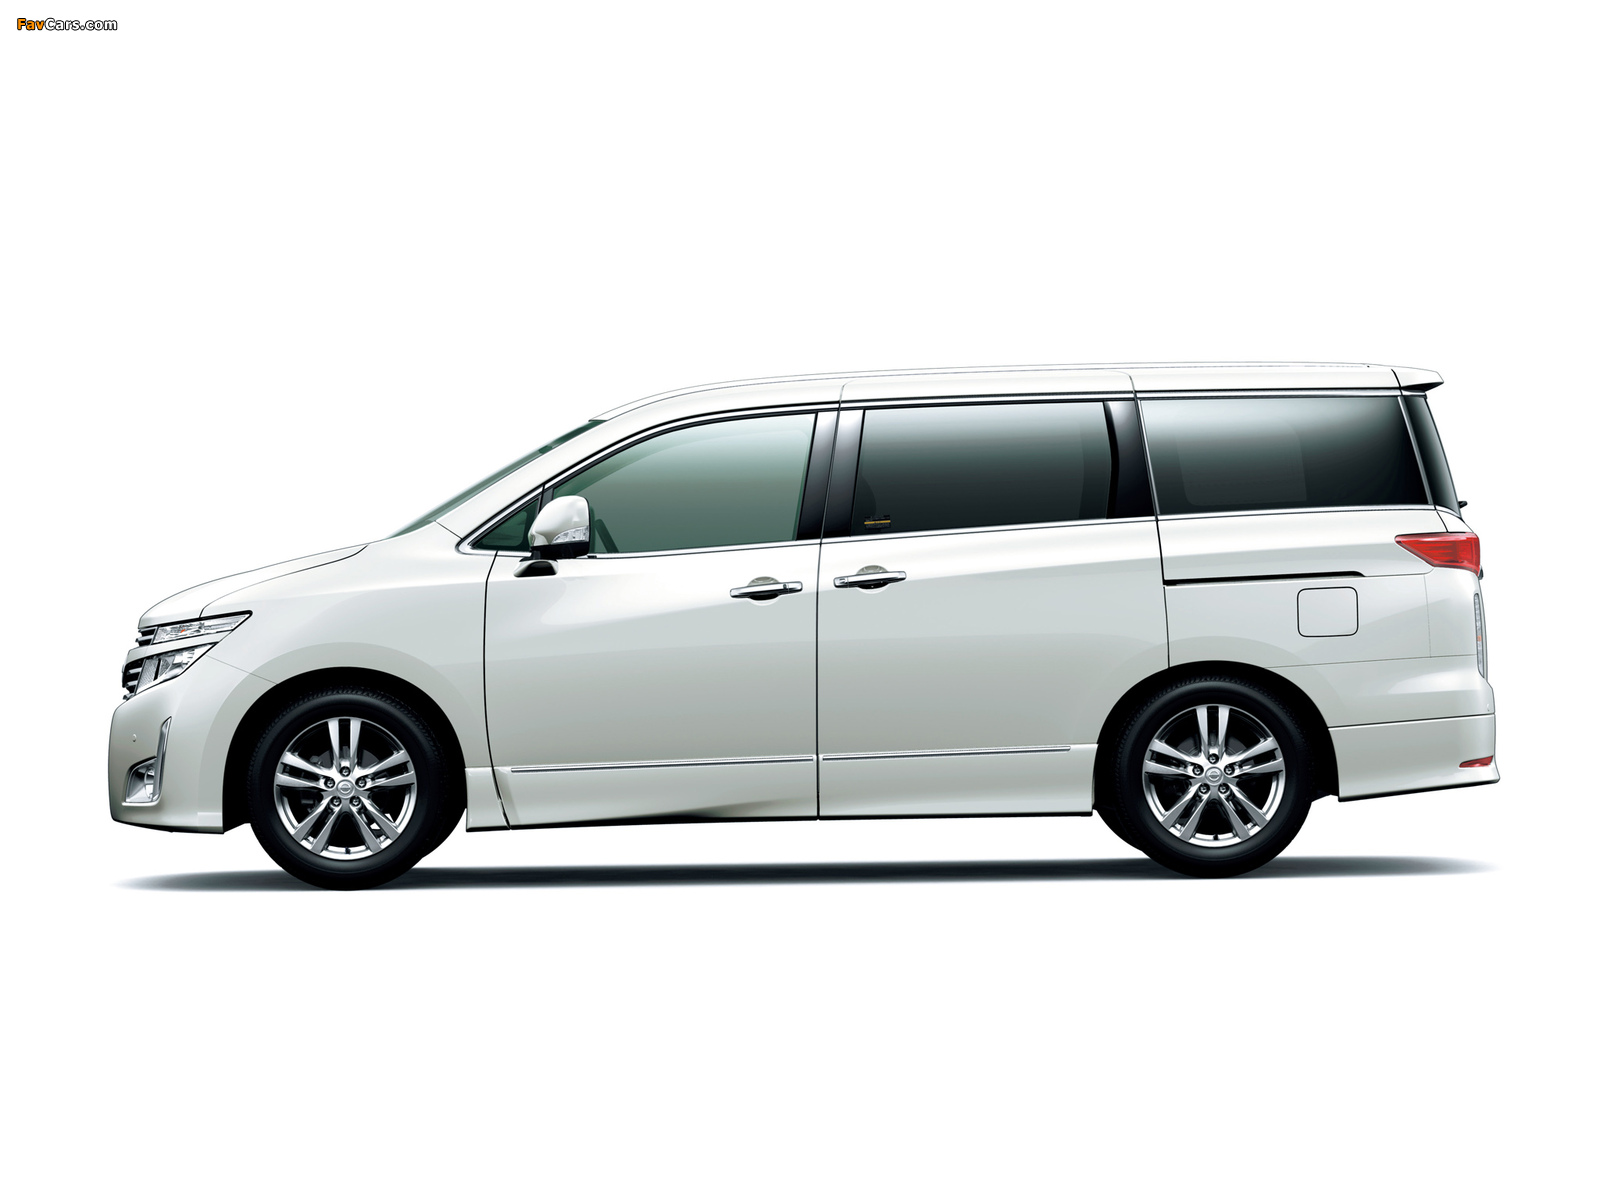 Nissan Elgrand Highway Star (E52) 2010 images (1600 x 1200)